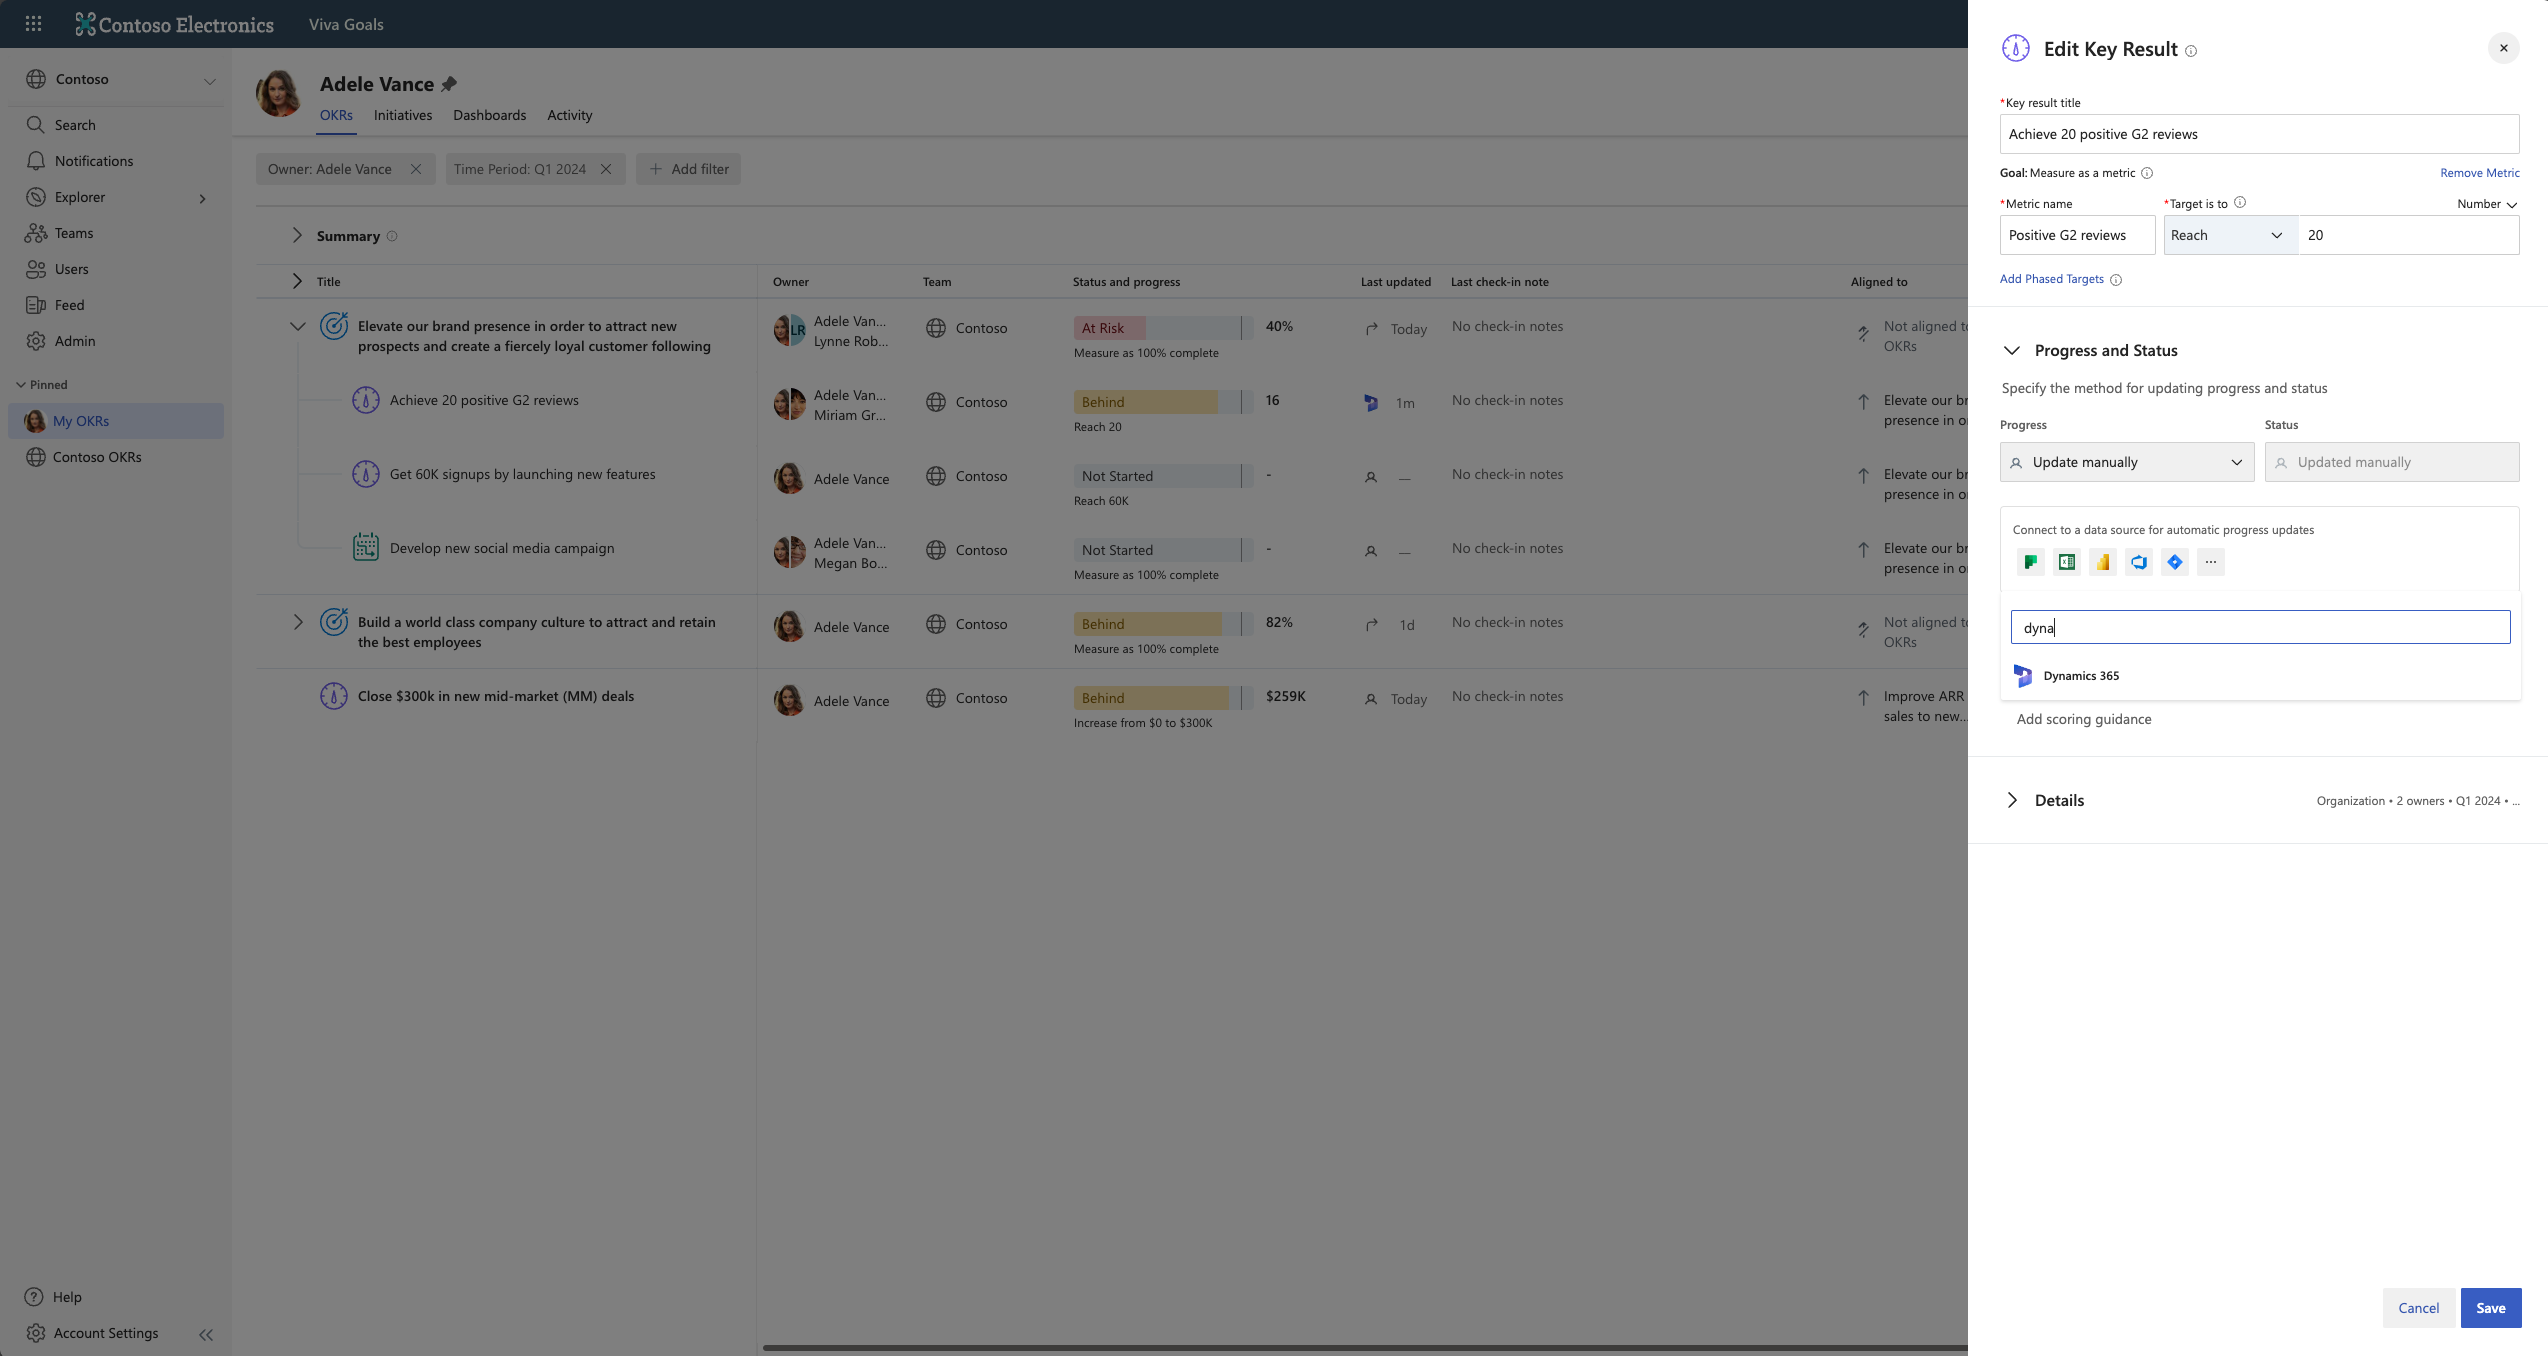 Screenshot of selecting the Dynamics 365 option for a key result.